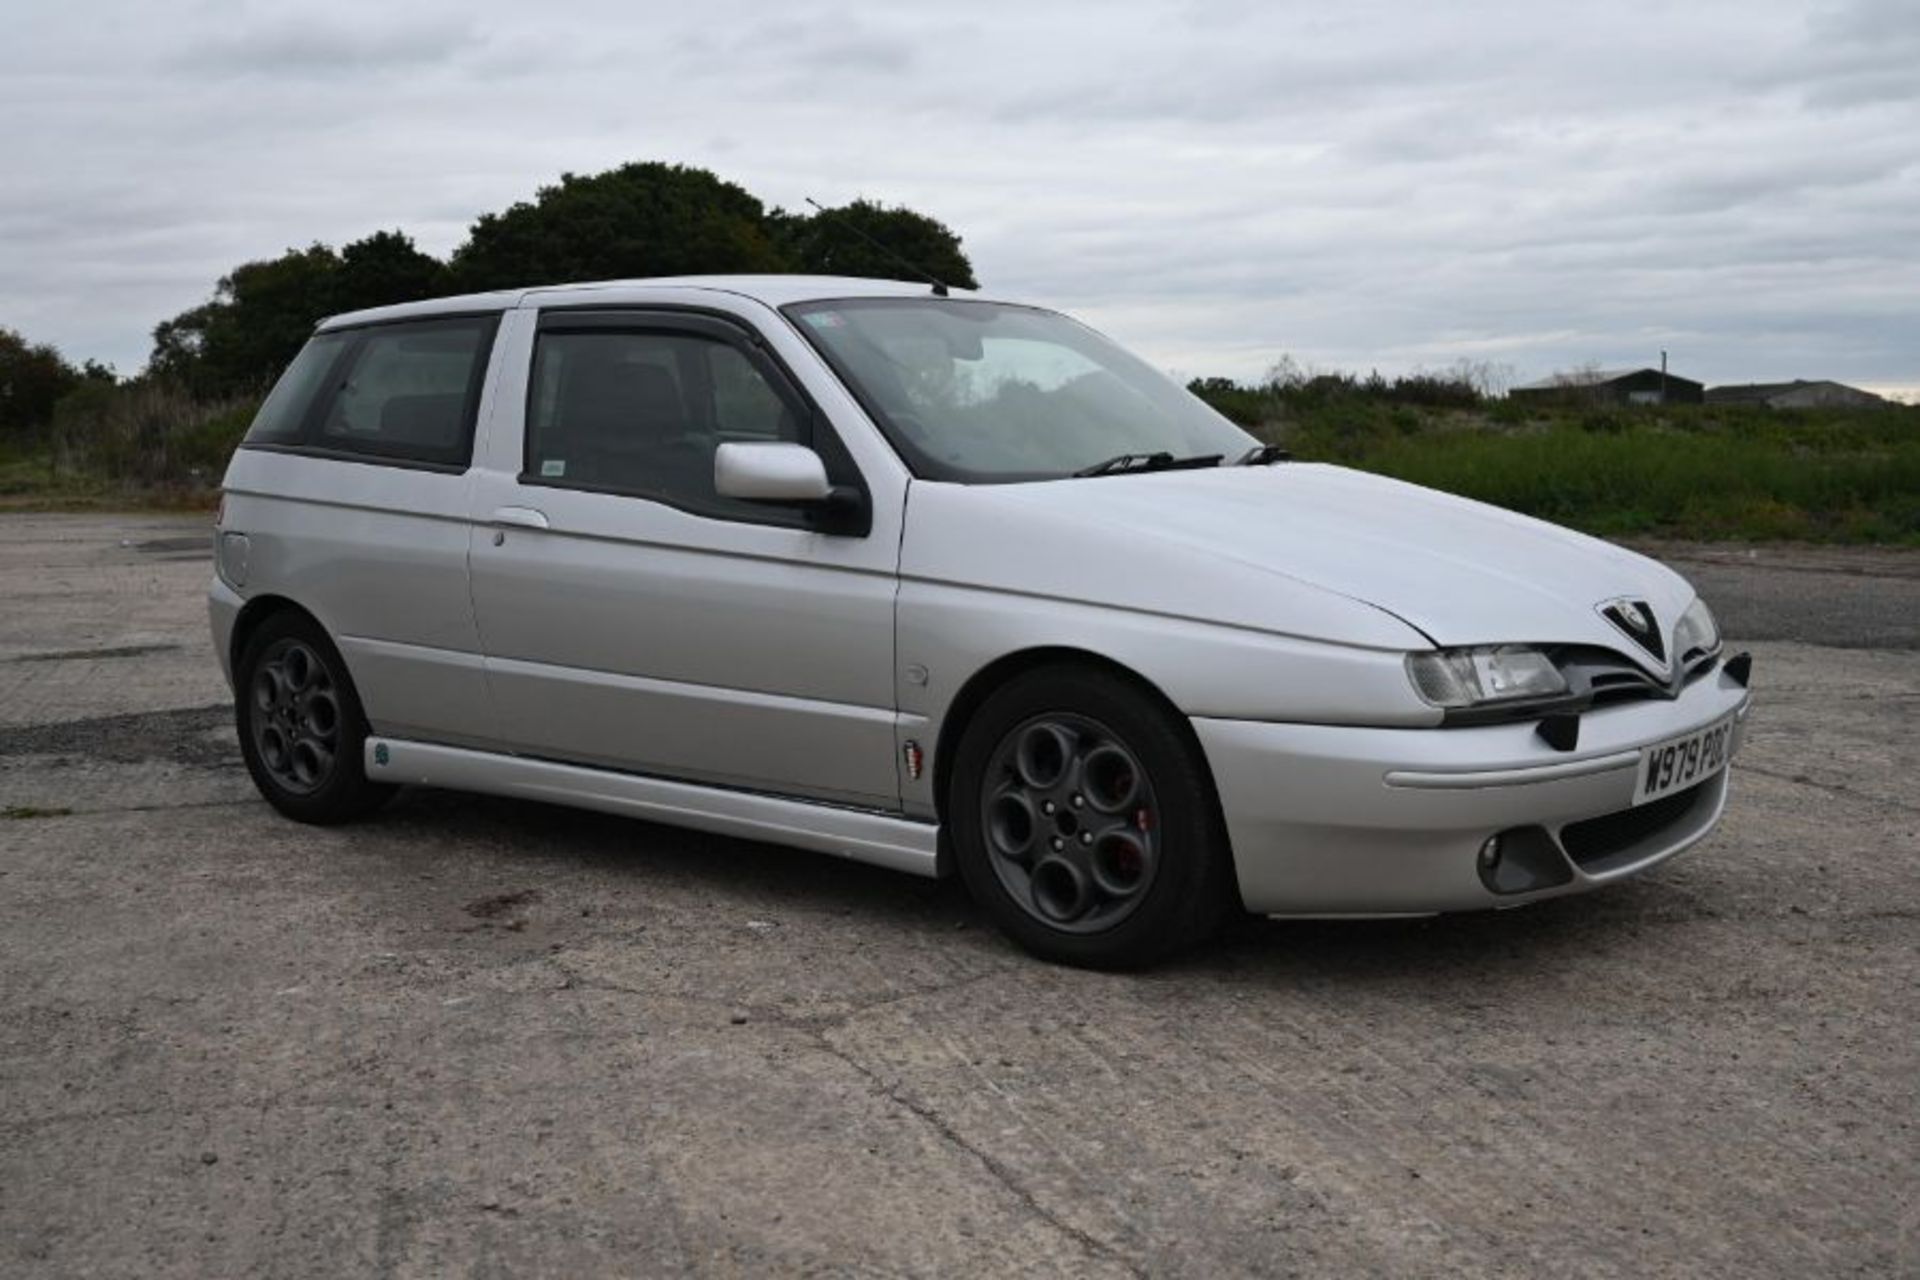 2000 Alfa Romeo 145 Clover Leaf. One of the very last UK registered examples of Alfa’s 145